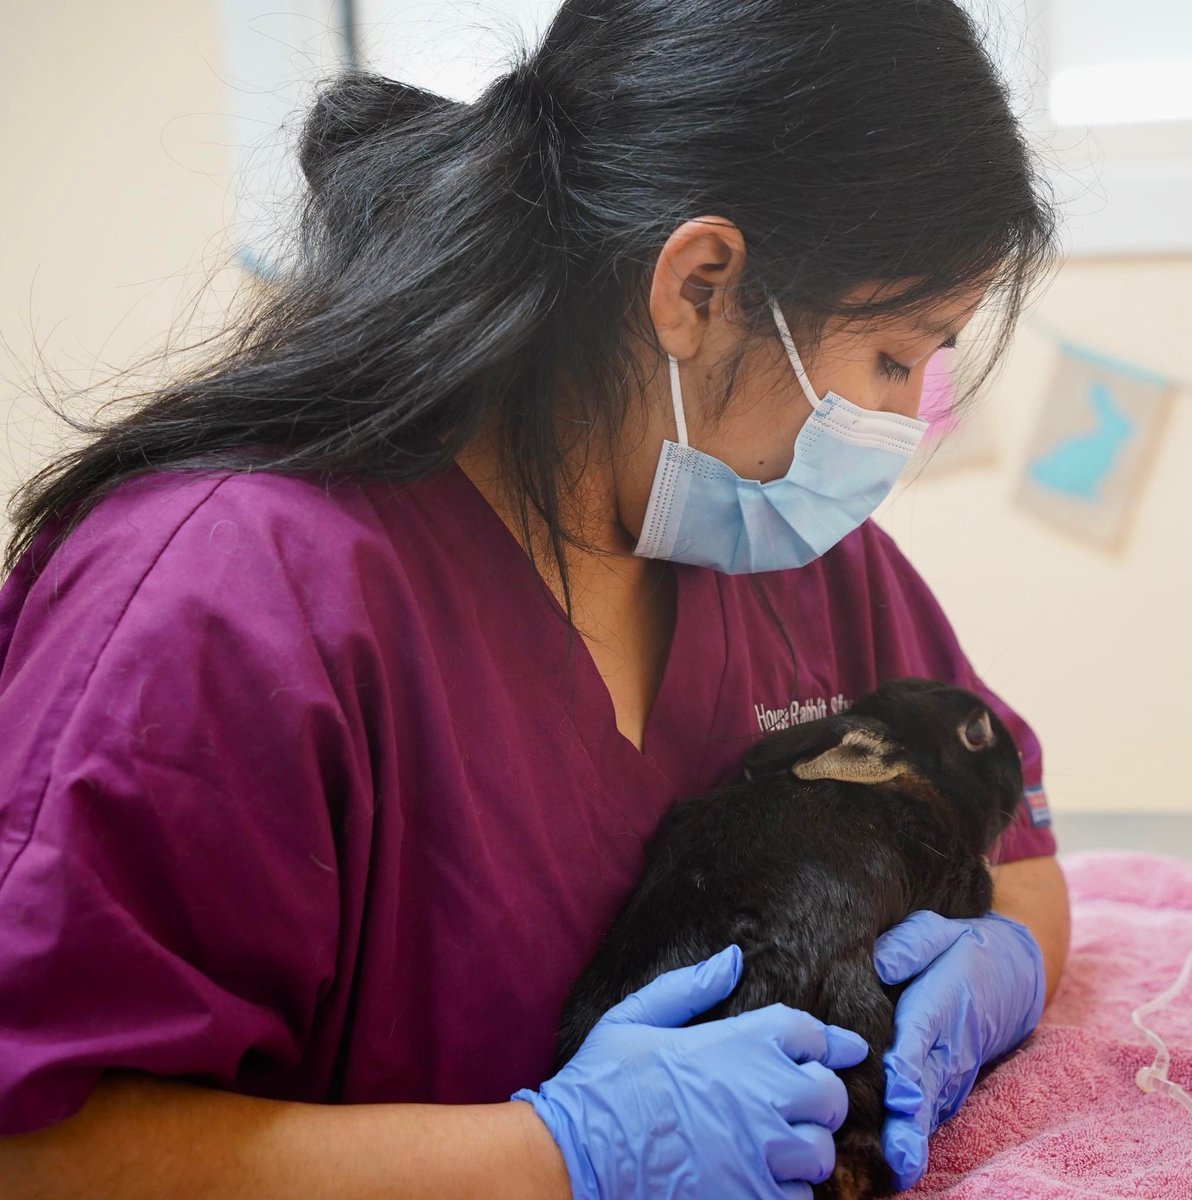 Our lifesaving rescue, education and awareness work on behalf of rabbits wouldn't be possible without the ongoing generosity of our donors. Every dollar has an impact! 💜🐇

Make a tax deductible gift to help rabbits today: rabbit.org/donate Thank you for your support!